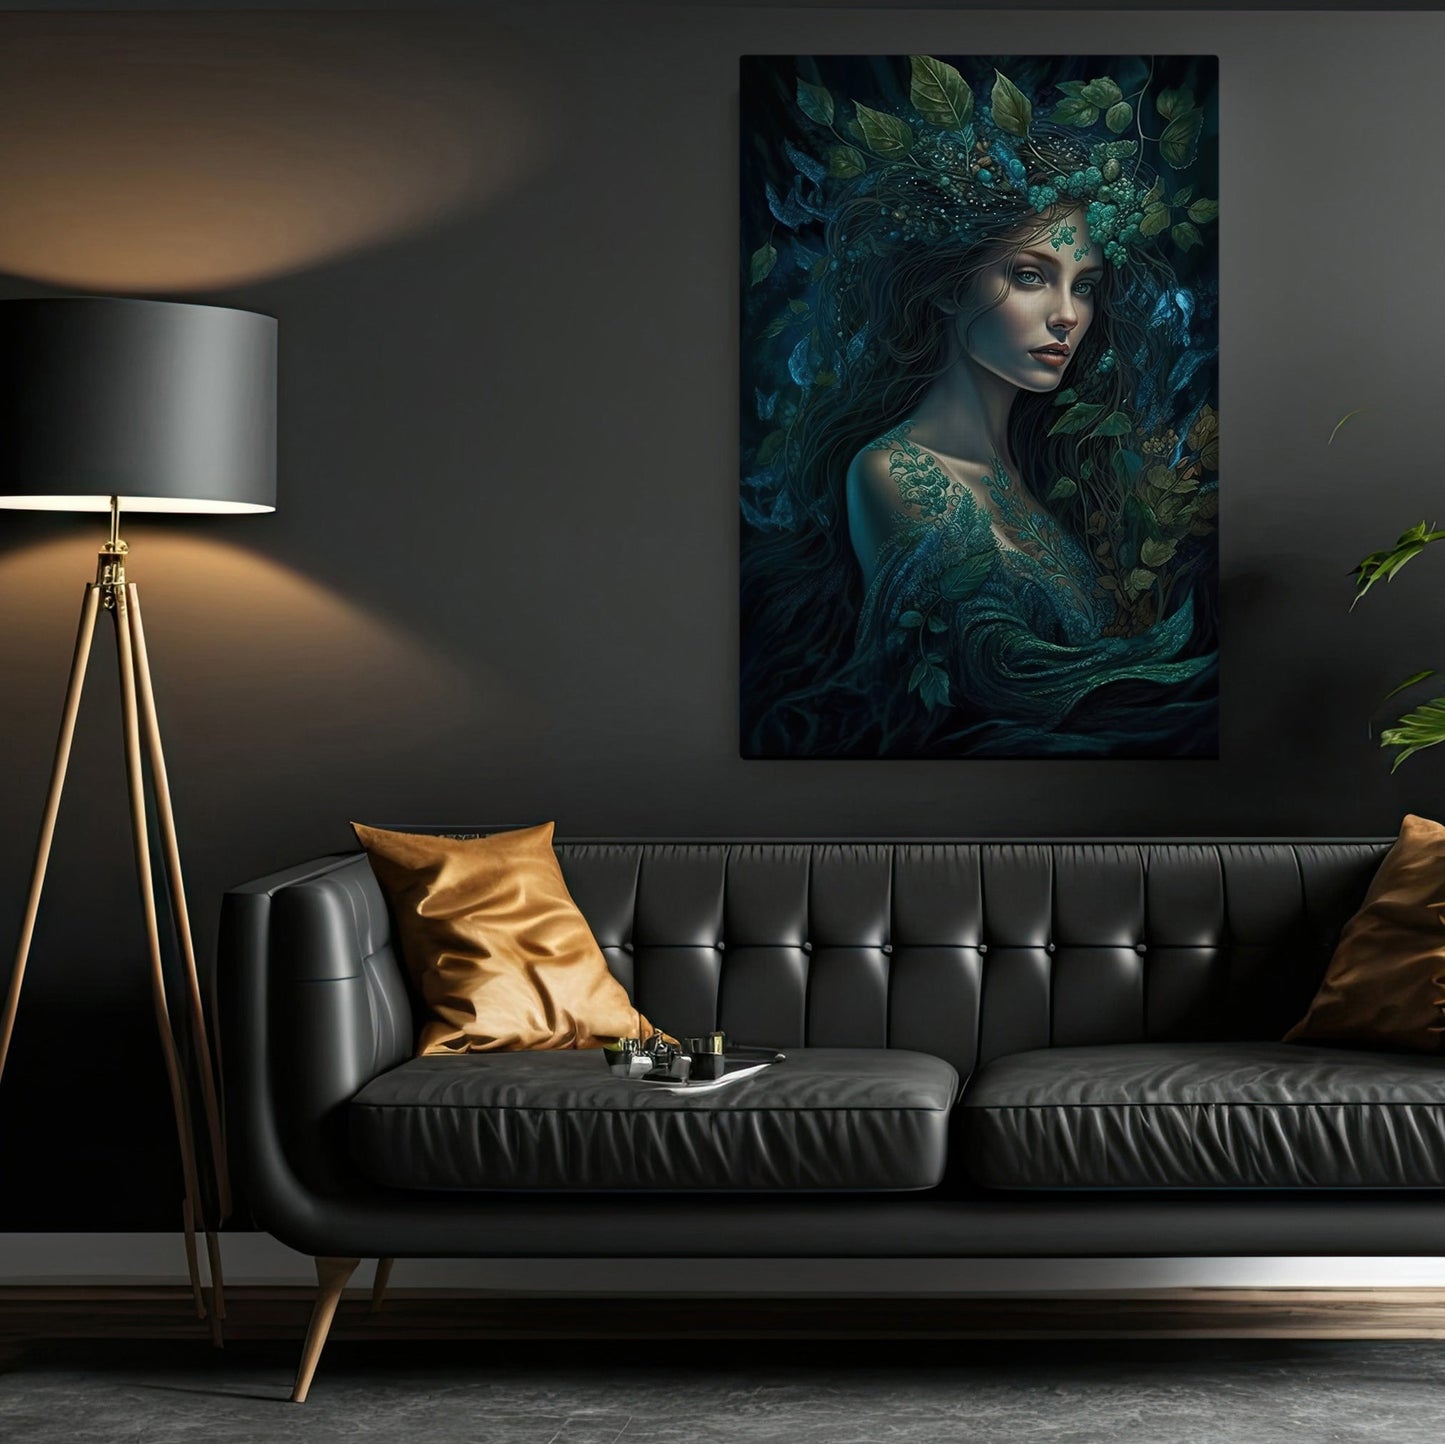 Spirit Of Forest Princess Mythical, Victorian Princess Canvas Painting, Wall Art Decor - Enchanted Forest Queen Poster Gift